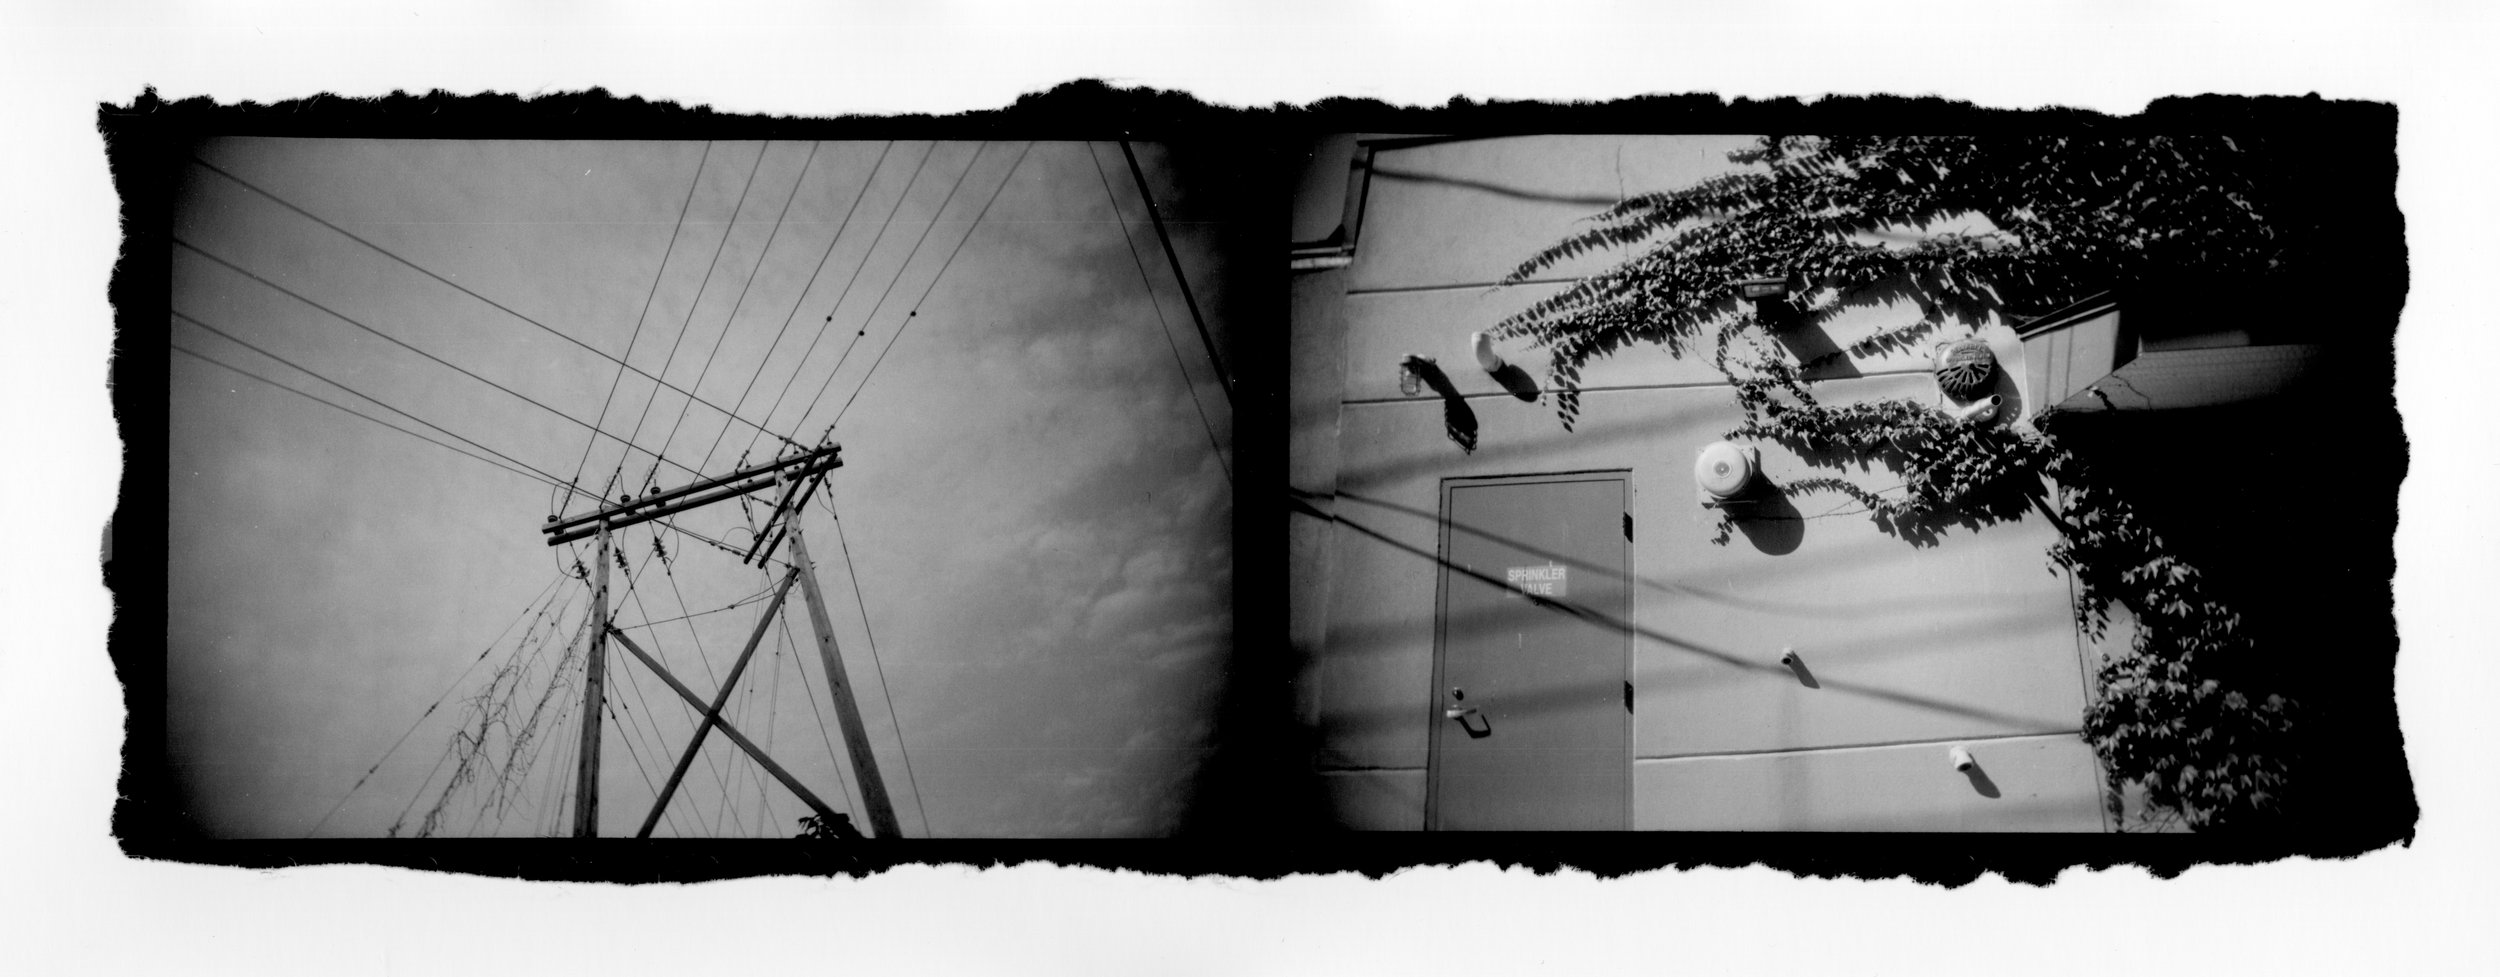 Wires and Wall Diptych, 2020